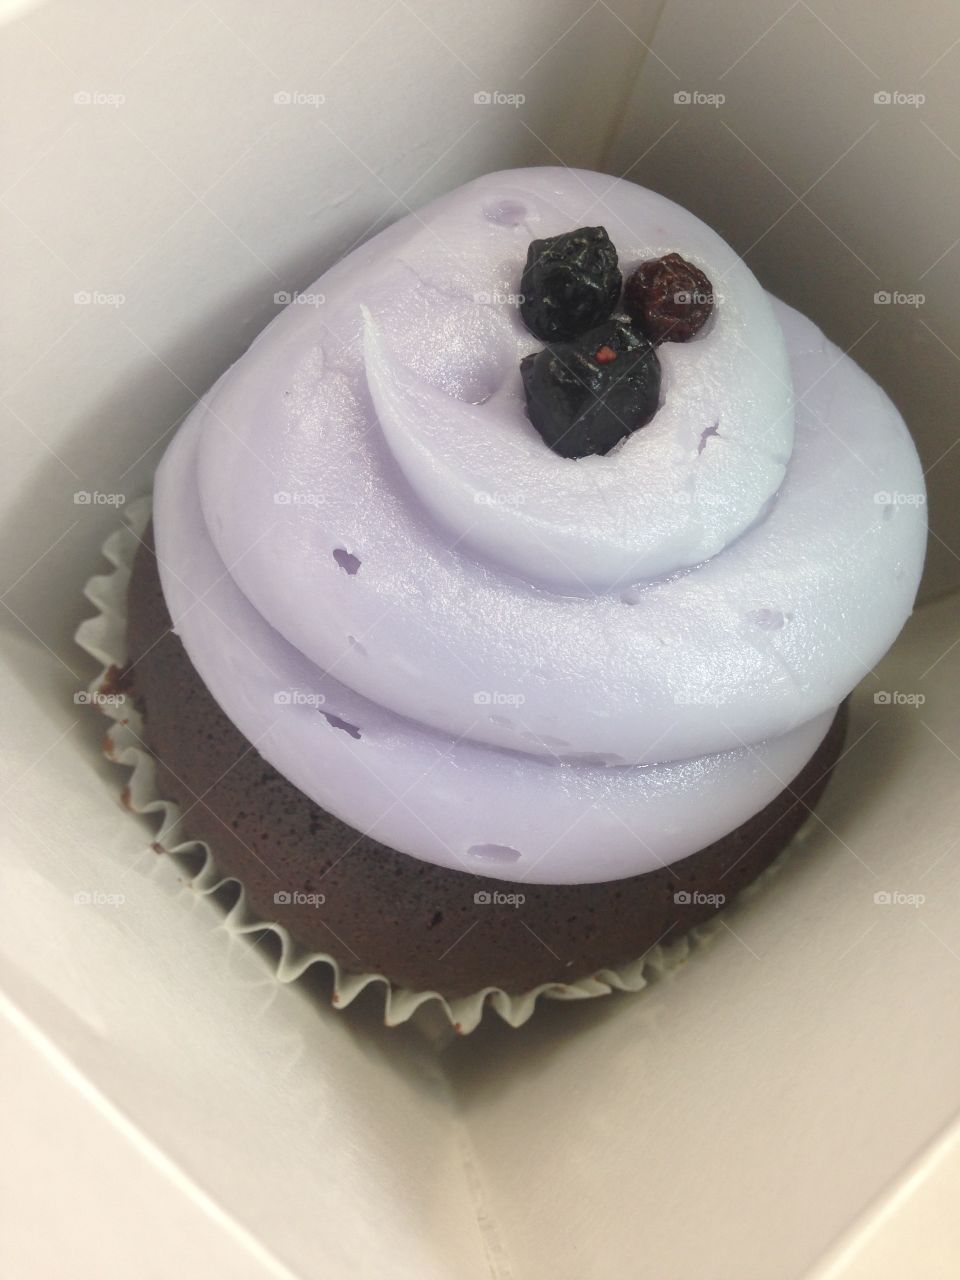 Chocolate cupcake with blueberry frosting